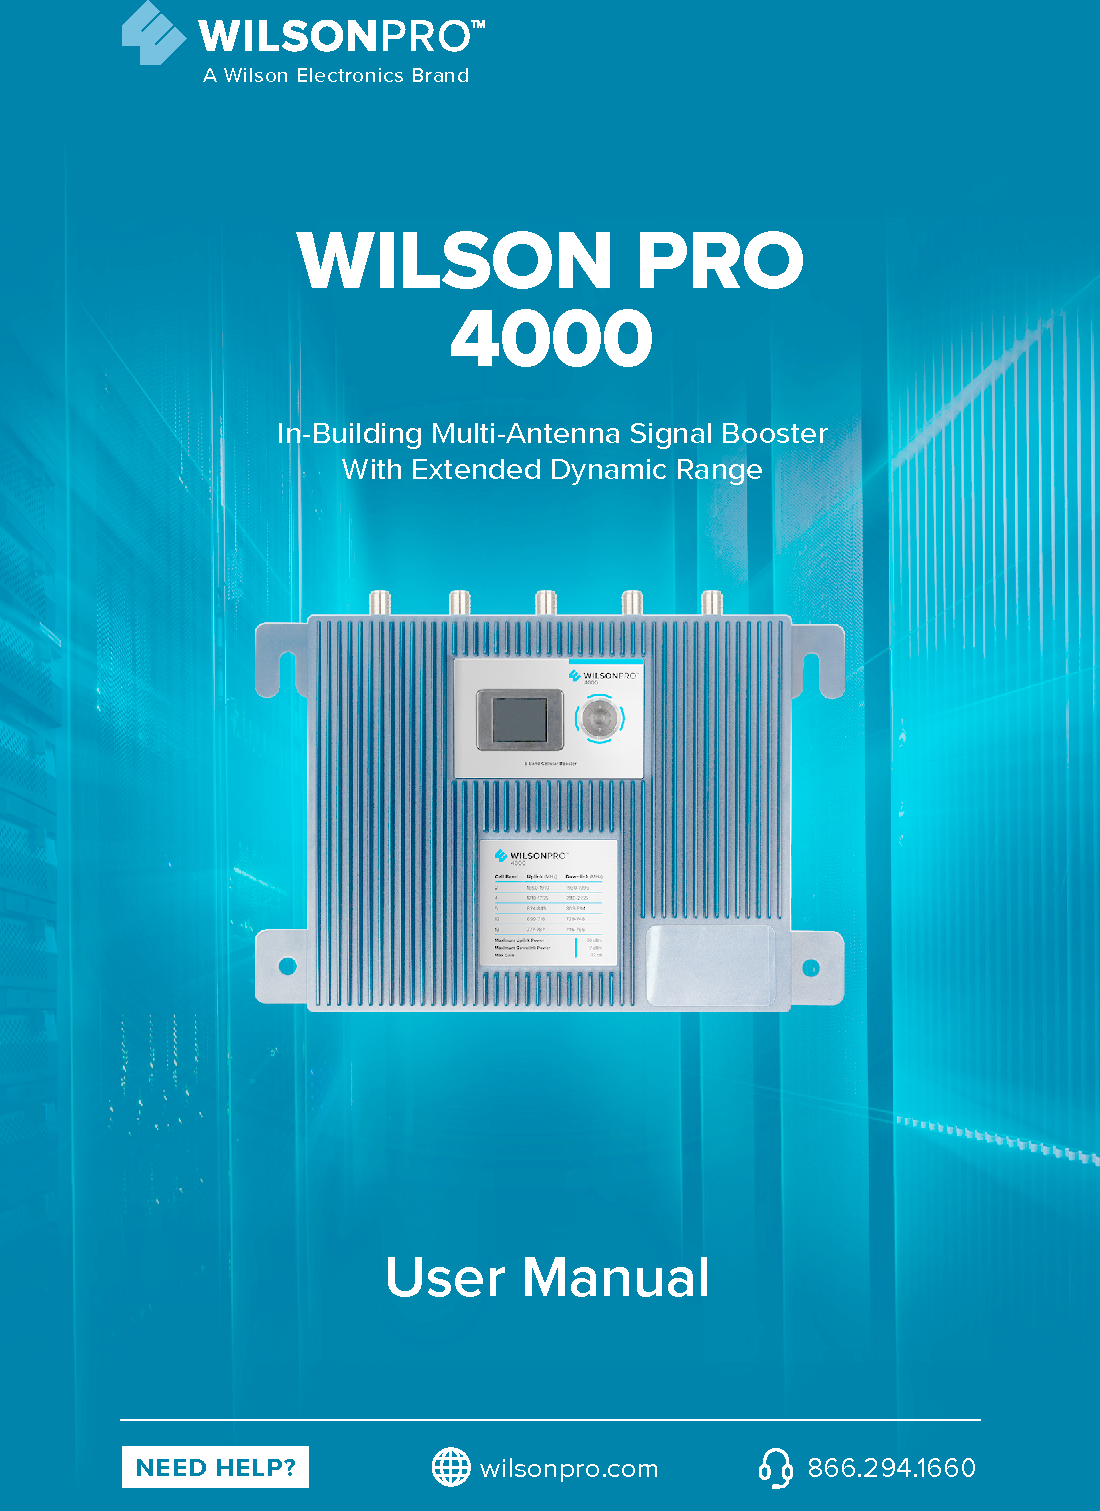 NEED HELP? wilsonpro.com 866.294.1660User ManualIn-Building Multi-Antenna Signal BoosterWith Extended Dynamic RangeWILSON PRO4000A Wilson Electronics Brand